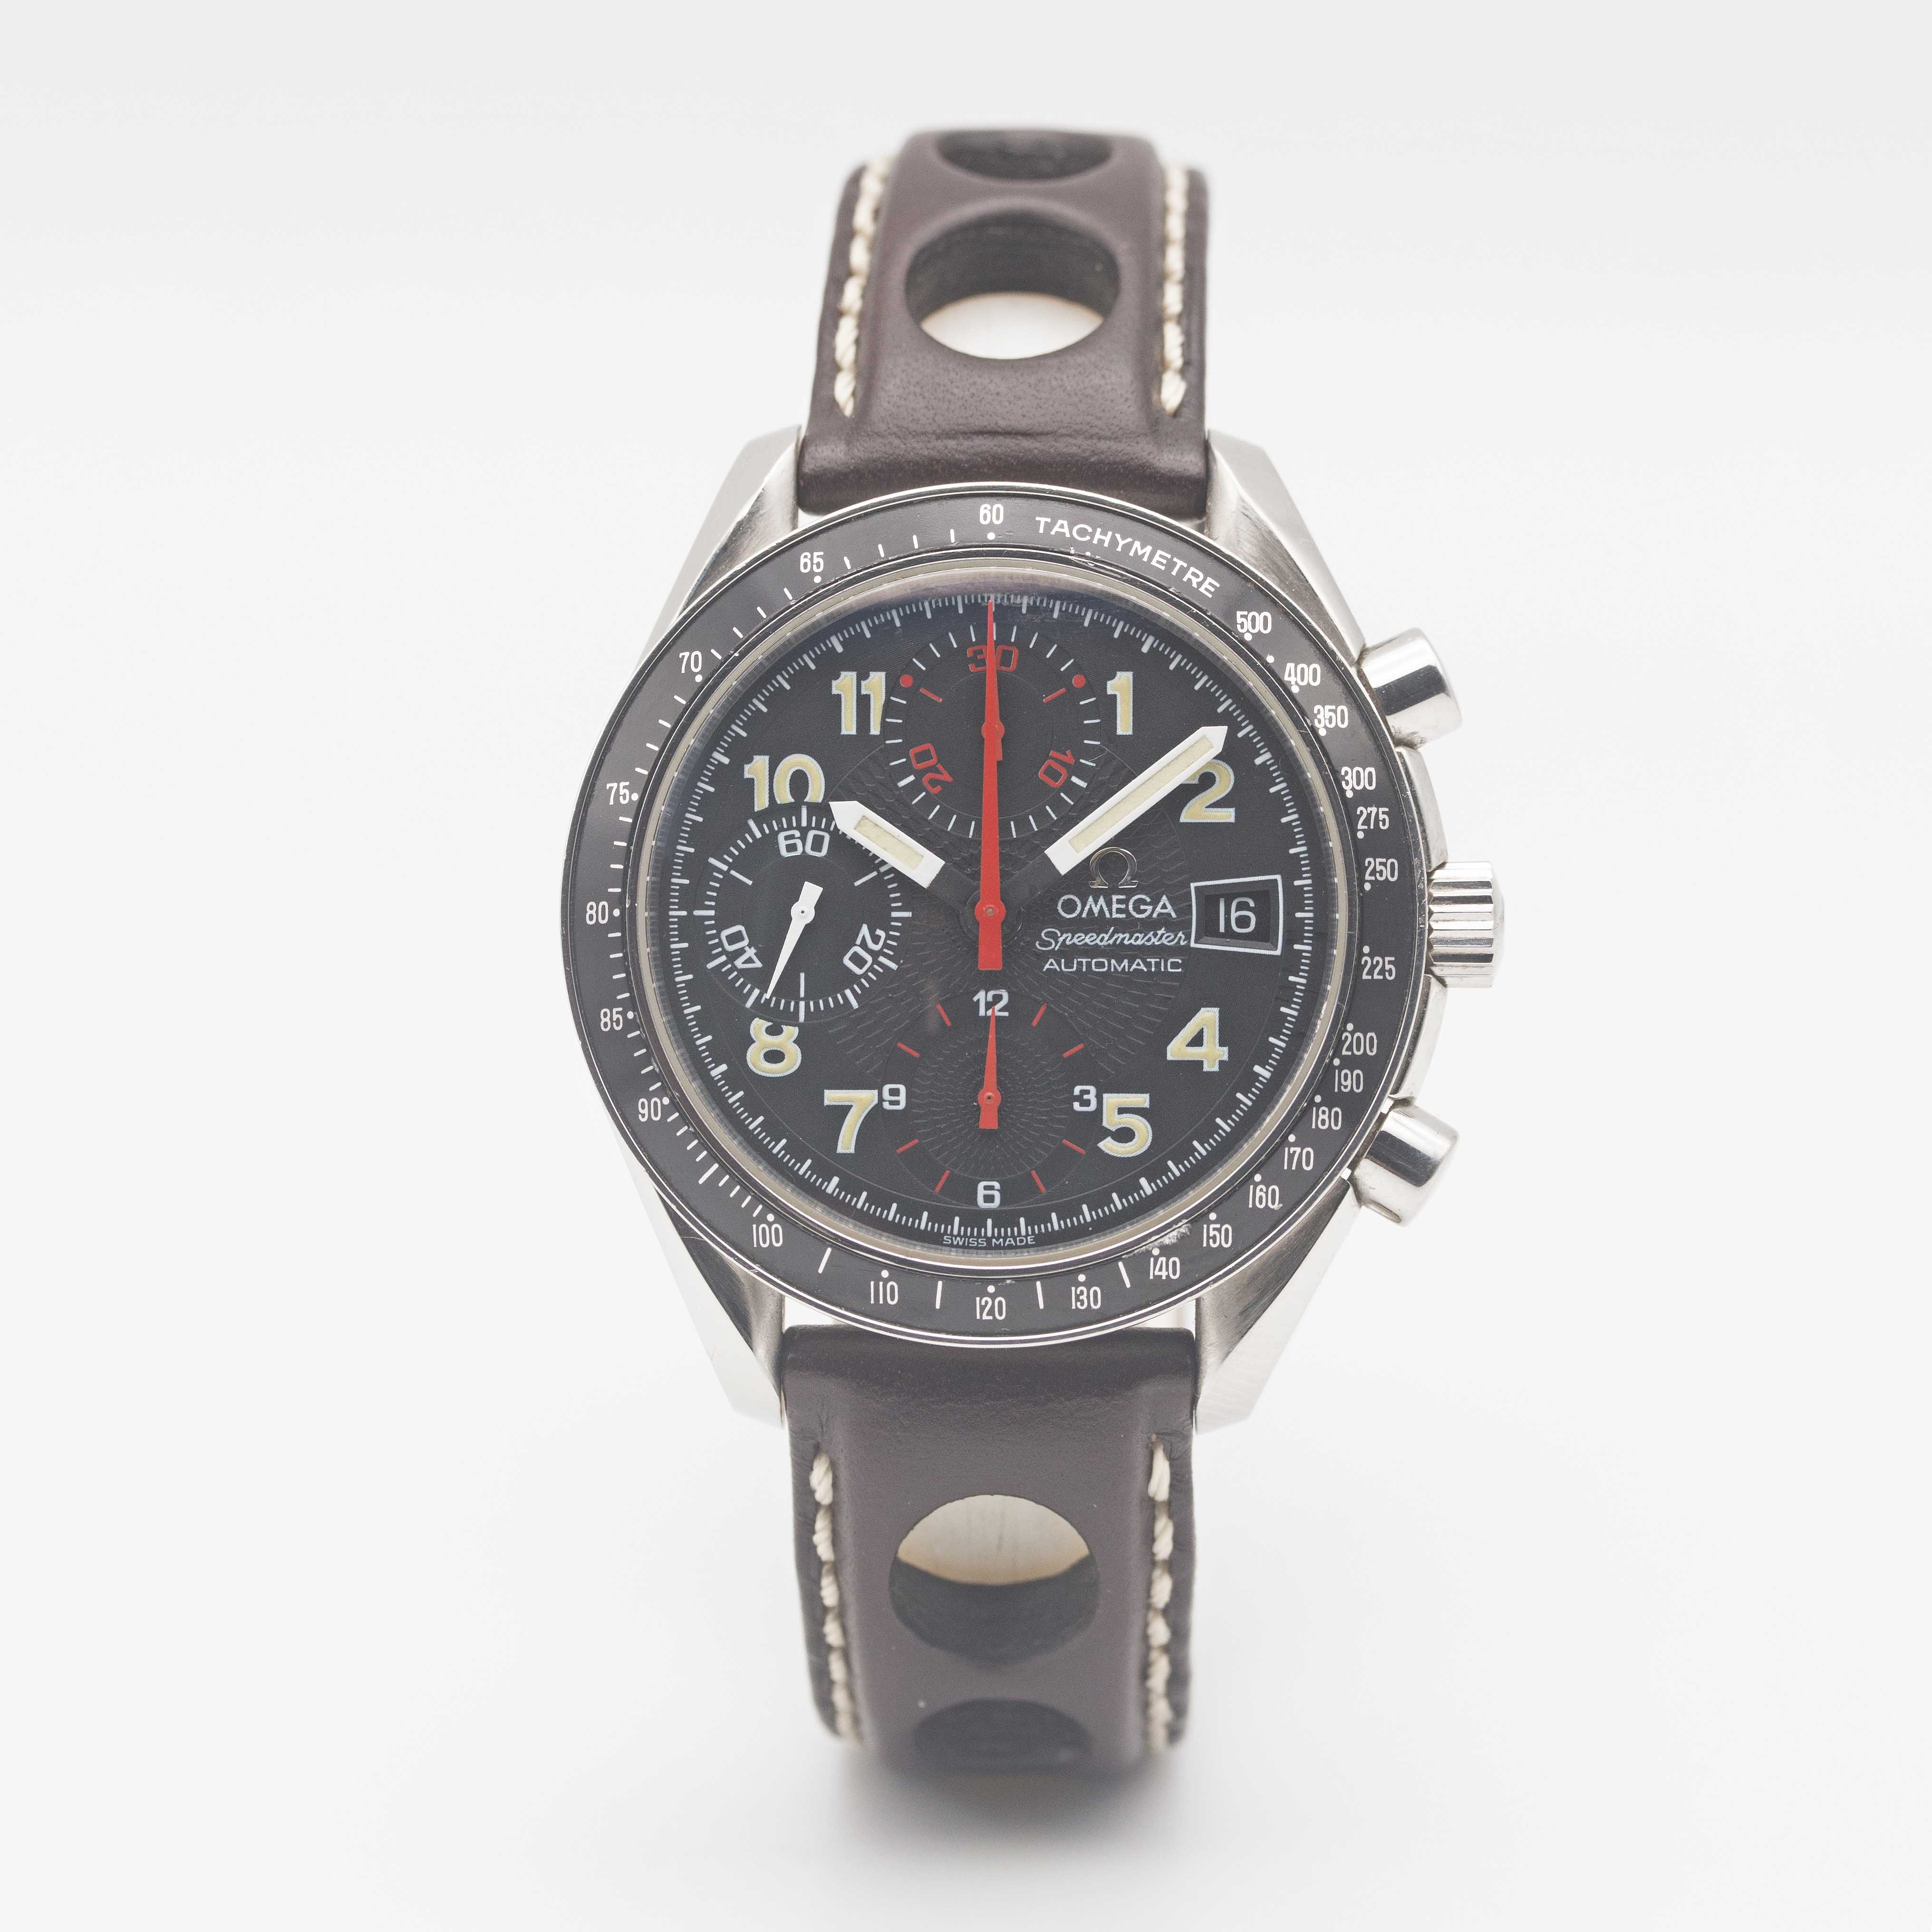 A GENTLEMAN'S STAINLESS STEEL OMEGA SPEEDMASTER AUTOMATIC CHRONOGRAPH WRIST WATCH CIRCA 1999 - Image 2 of 9